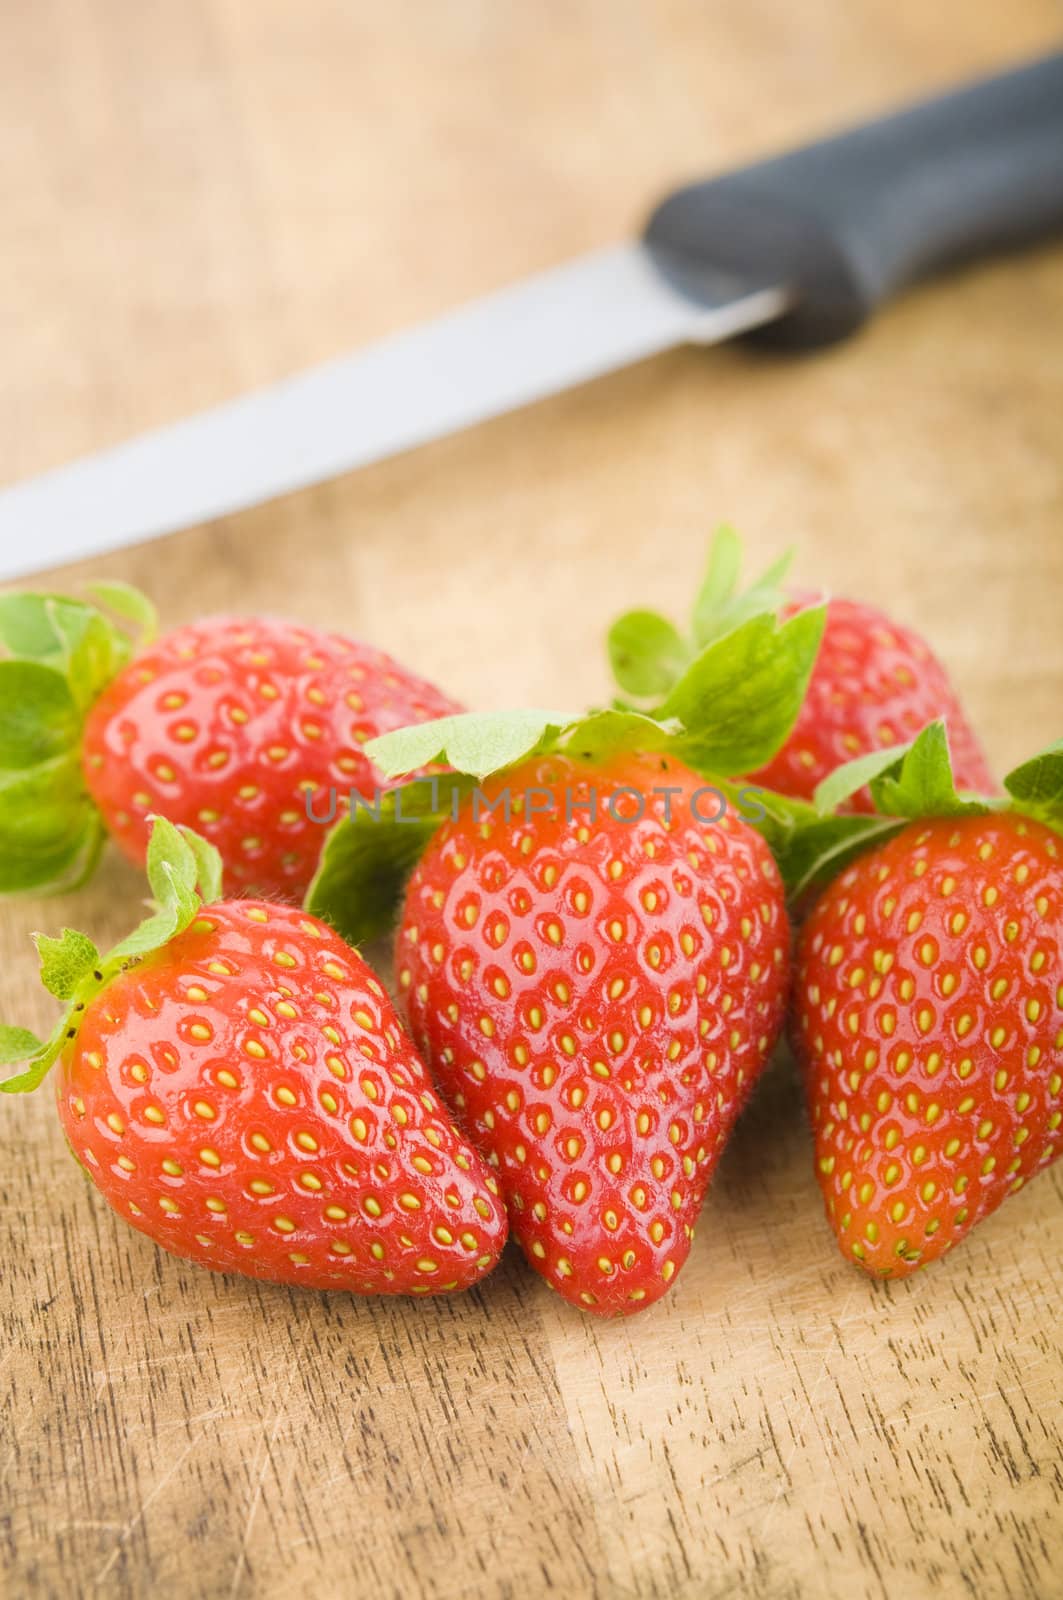 strawberries with kitchen knife on background,looks good for ingredients 